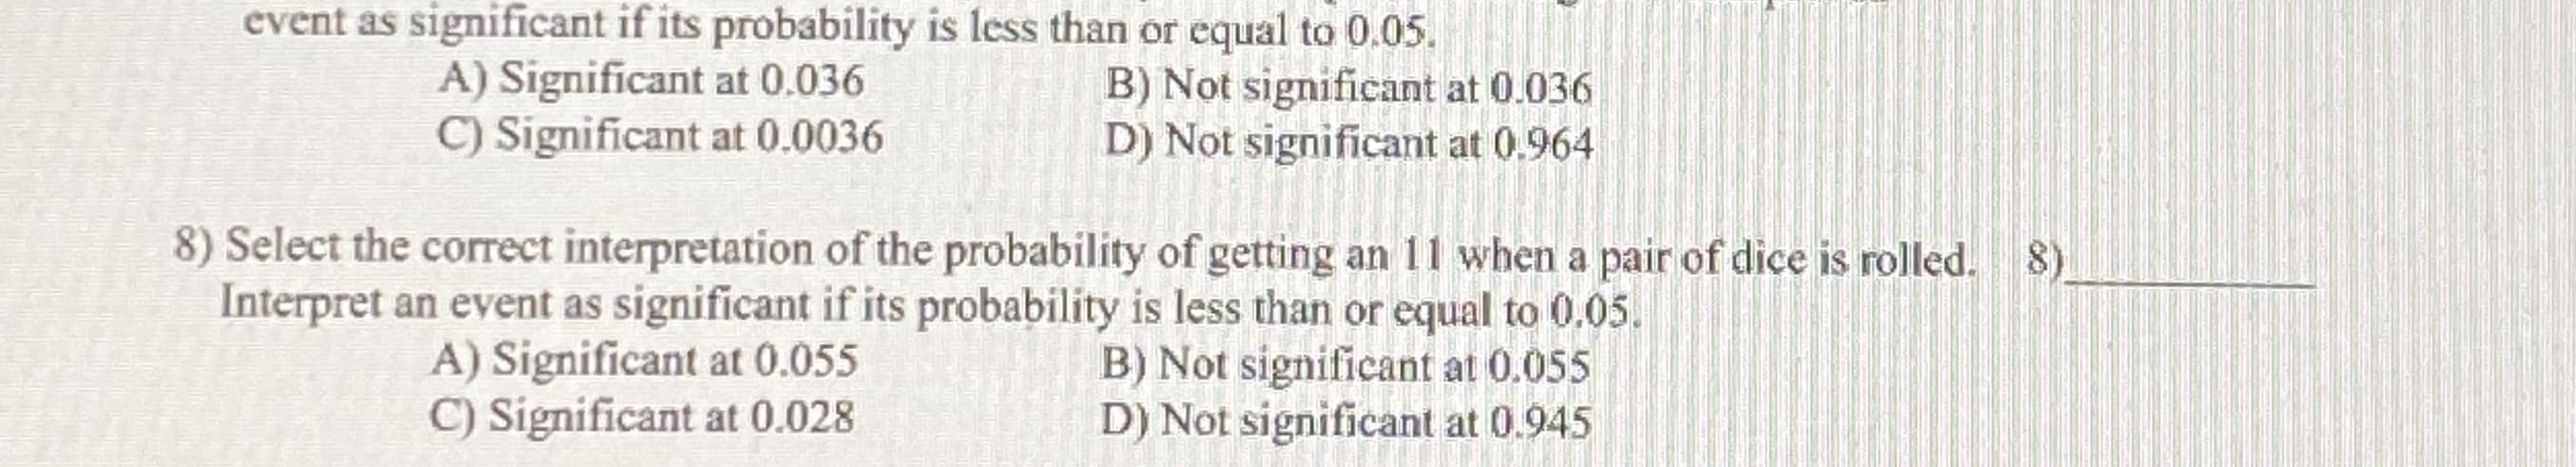 Select the correct interpretation of the probability of getting an 1I when a pair of dice is tolled. 8)
Interpret an event as significant if its probability is less than or equal to 0.05.
B) Not signi ficant at 0.055
D) Not significant at 0.945
A) Significant at 0.055
C) Significant at 0.028
